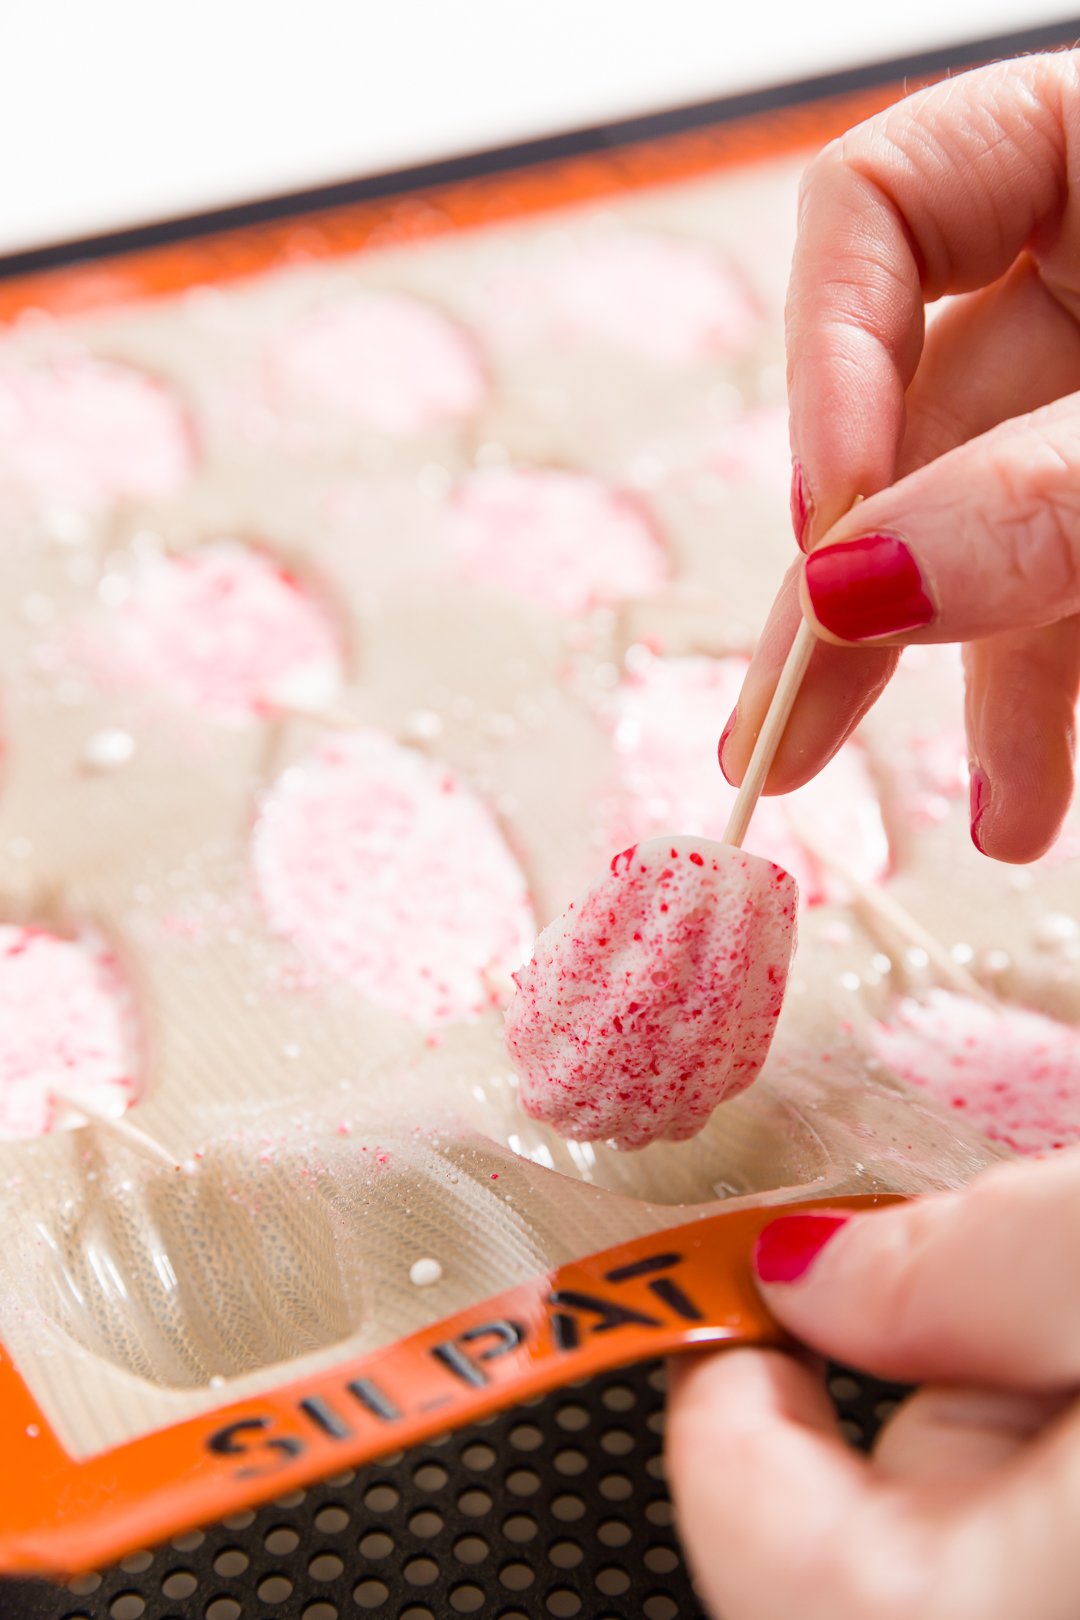 Removing candy cane madeleine from the mold